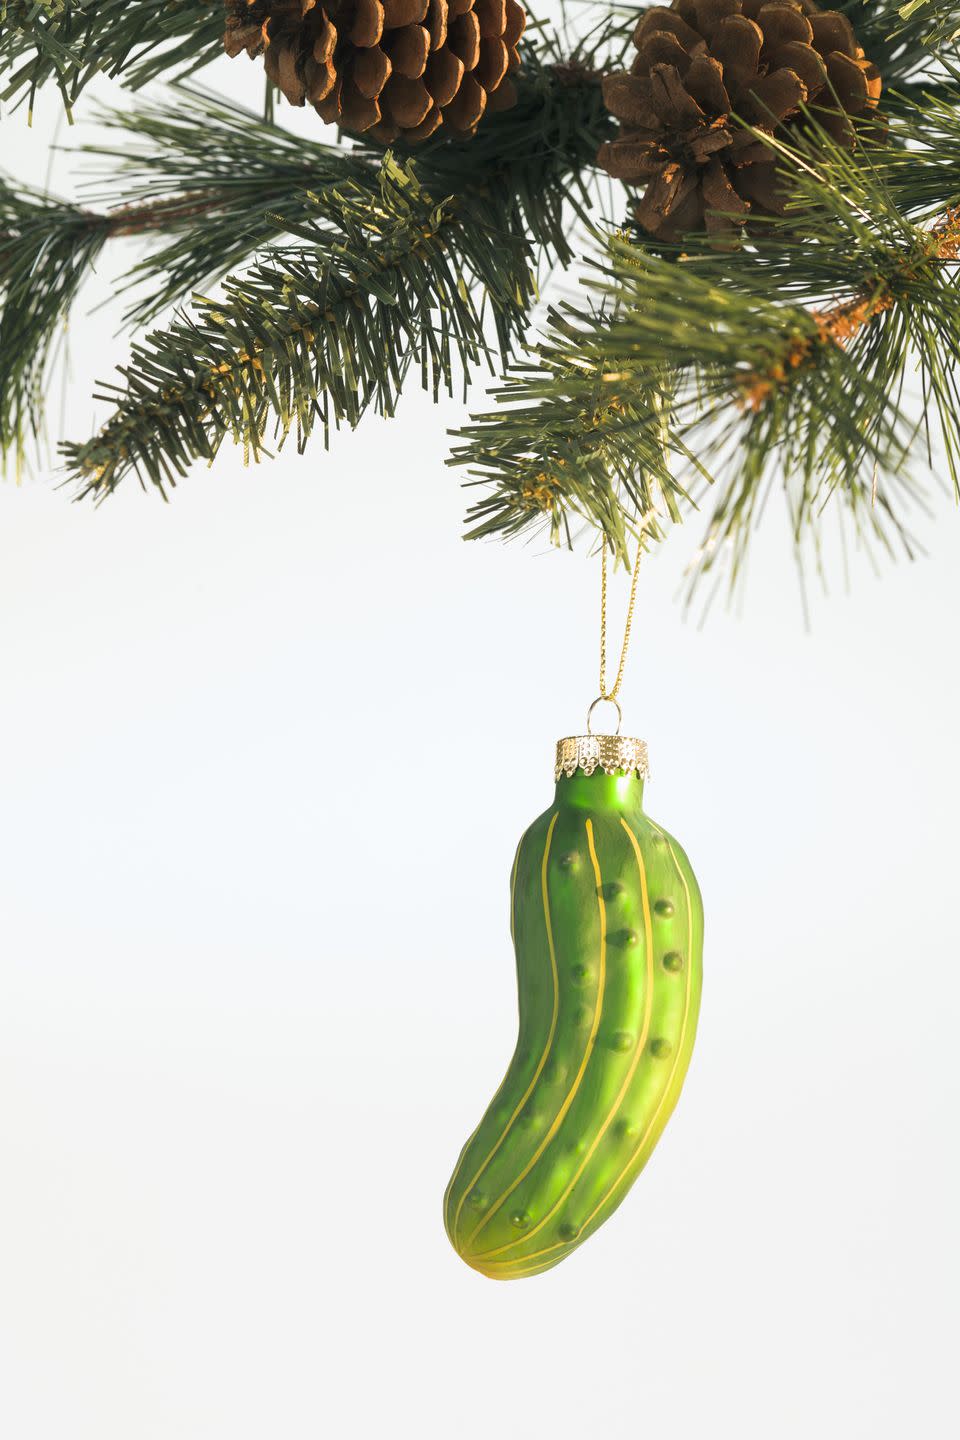 See Who Can Find the Pickle Ornament